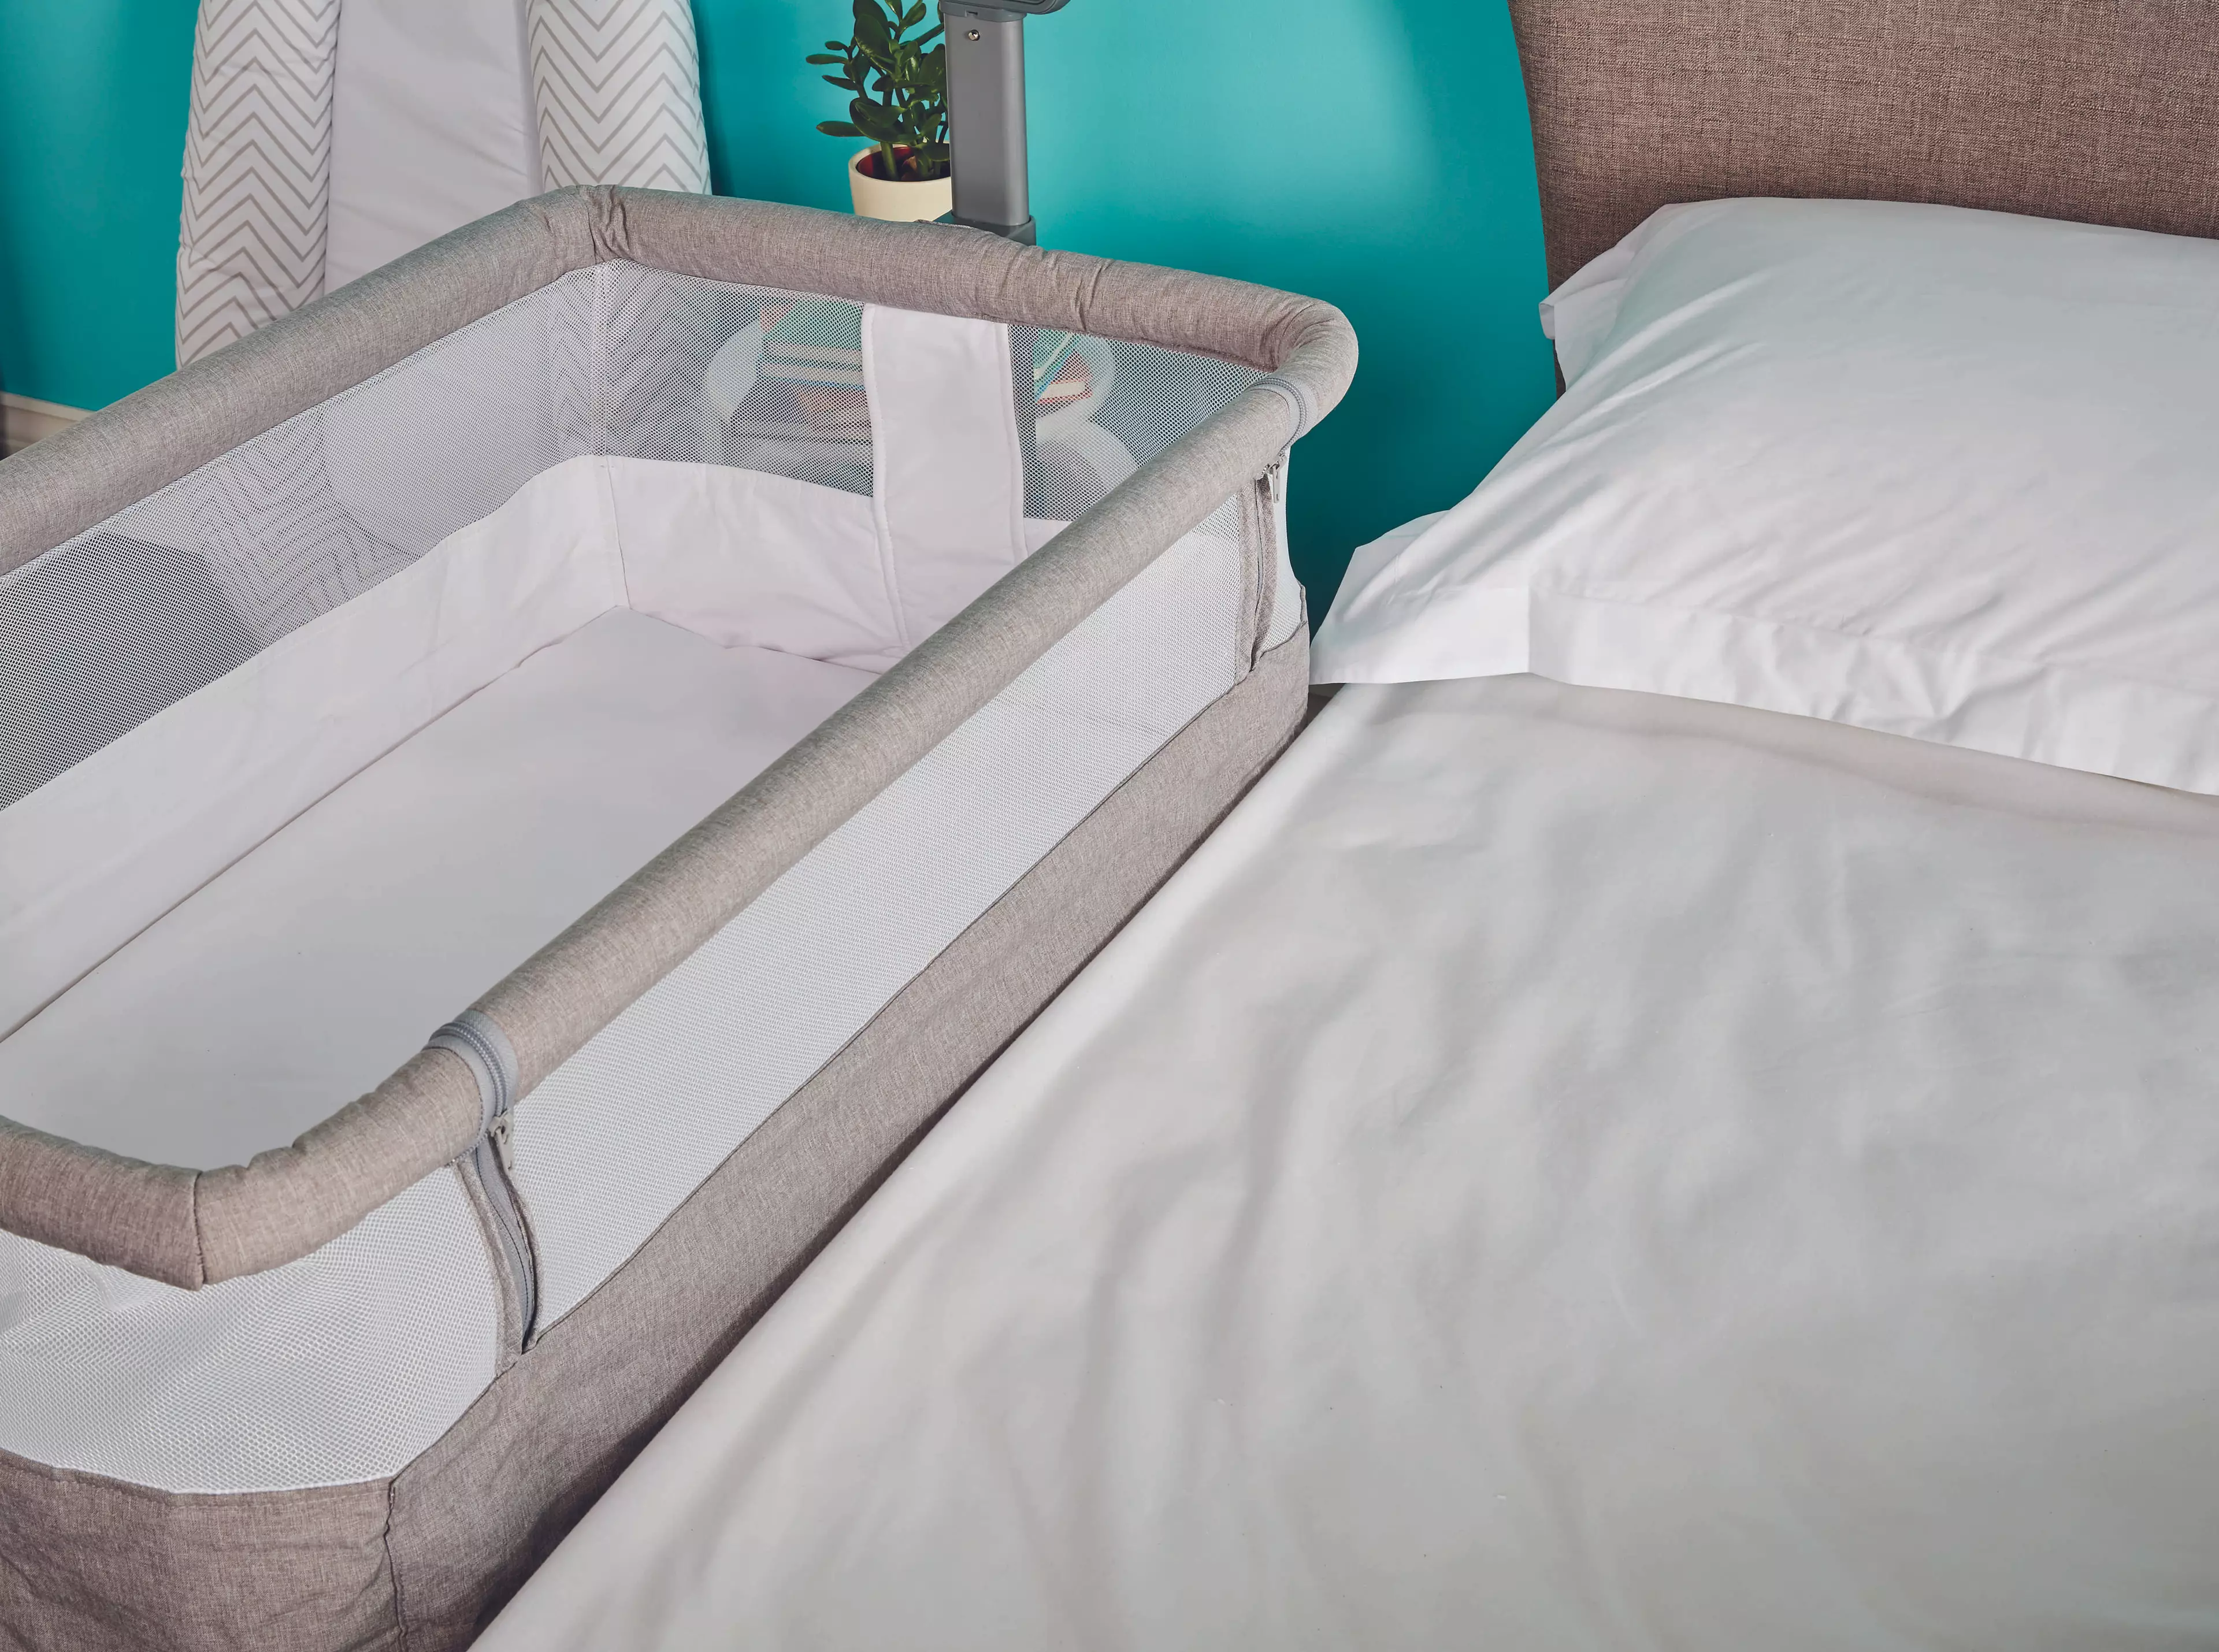 Highlights from the upcoming collection include Aldi's £79.99 Bedside Crib (